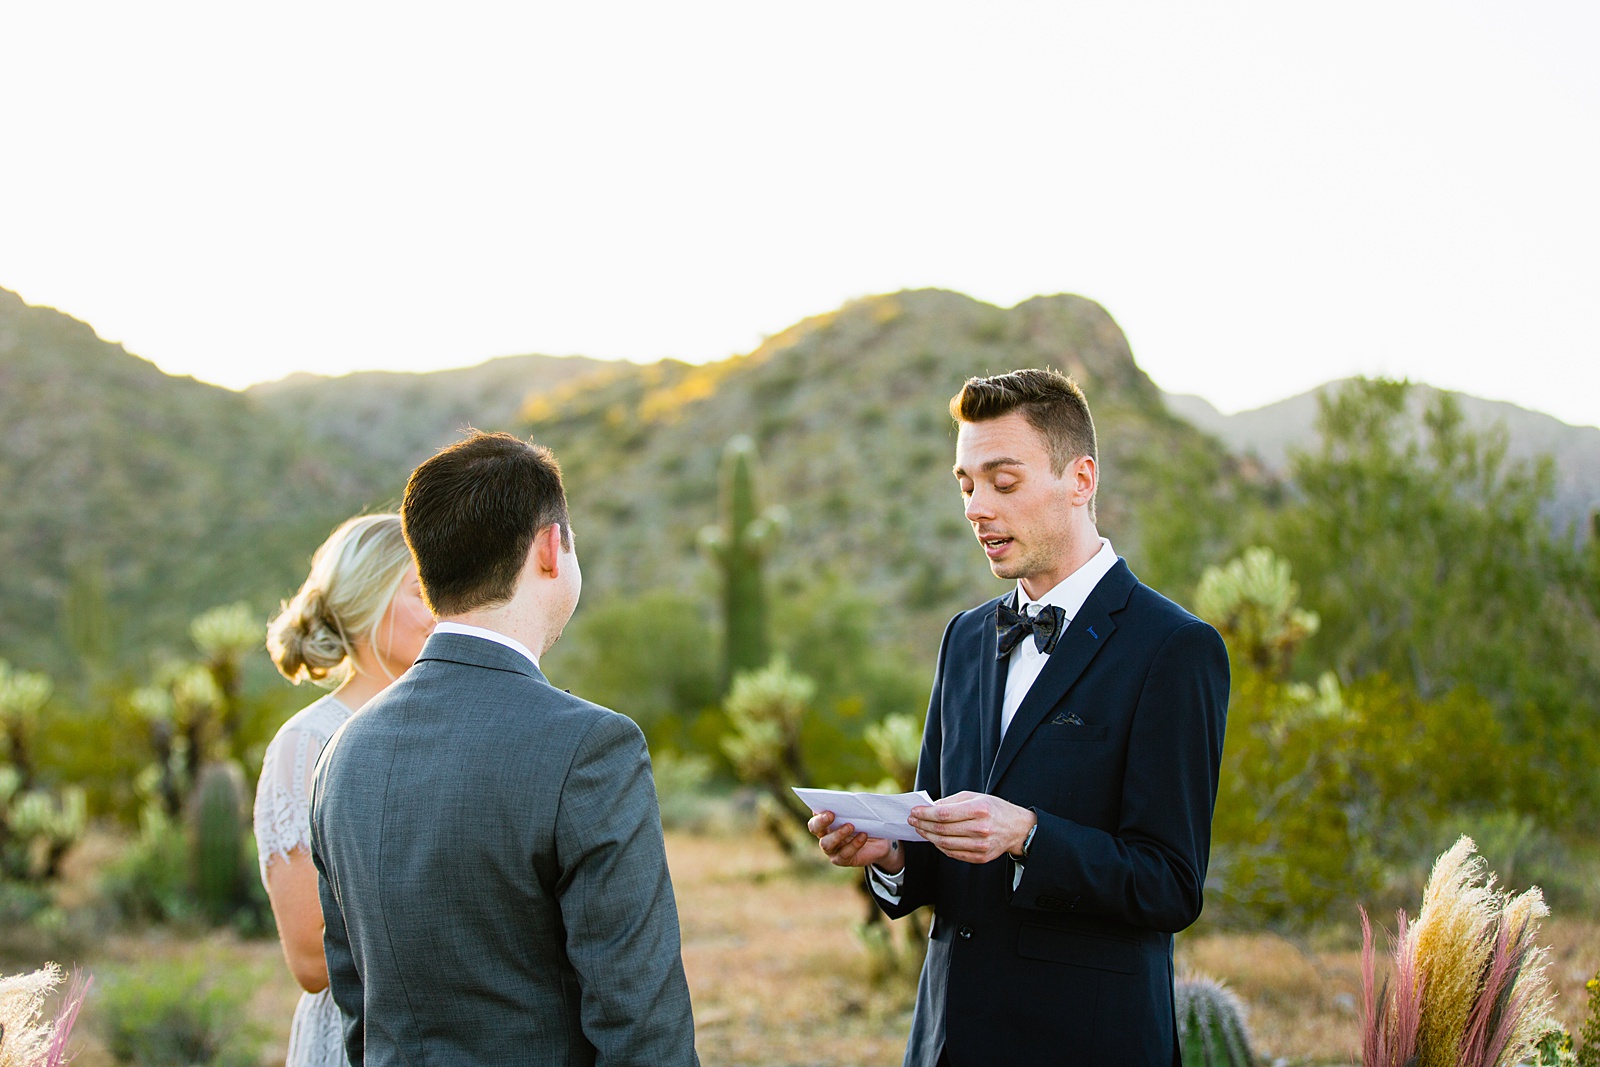 LGBTQ couple exchange vows during their wedding ceremony at White Tanks by Arizona elopement photographer PMA Photography.